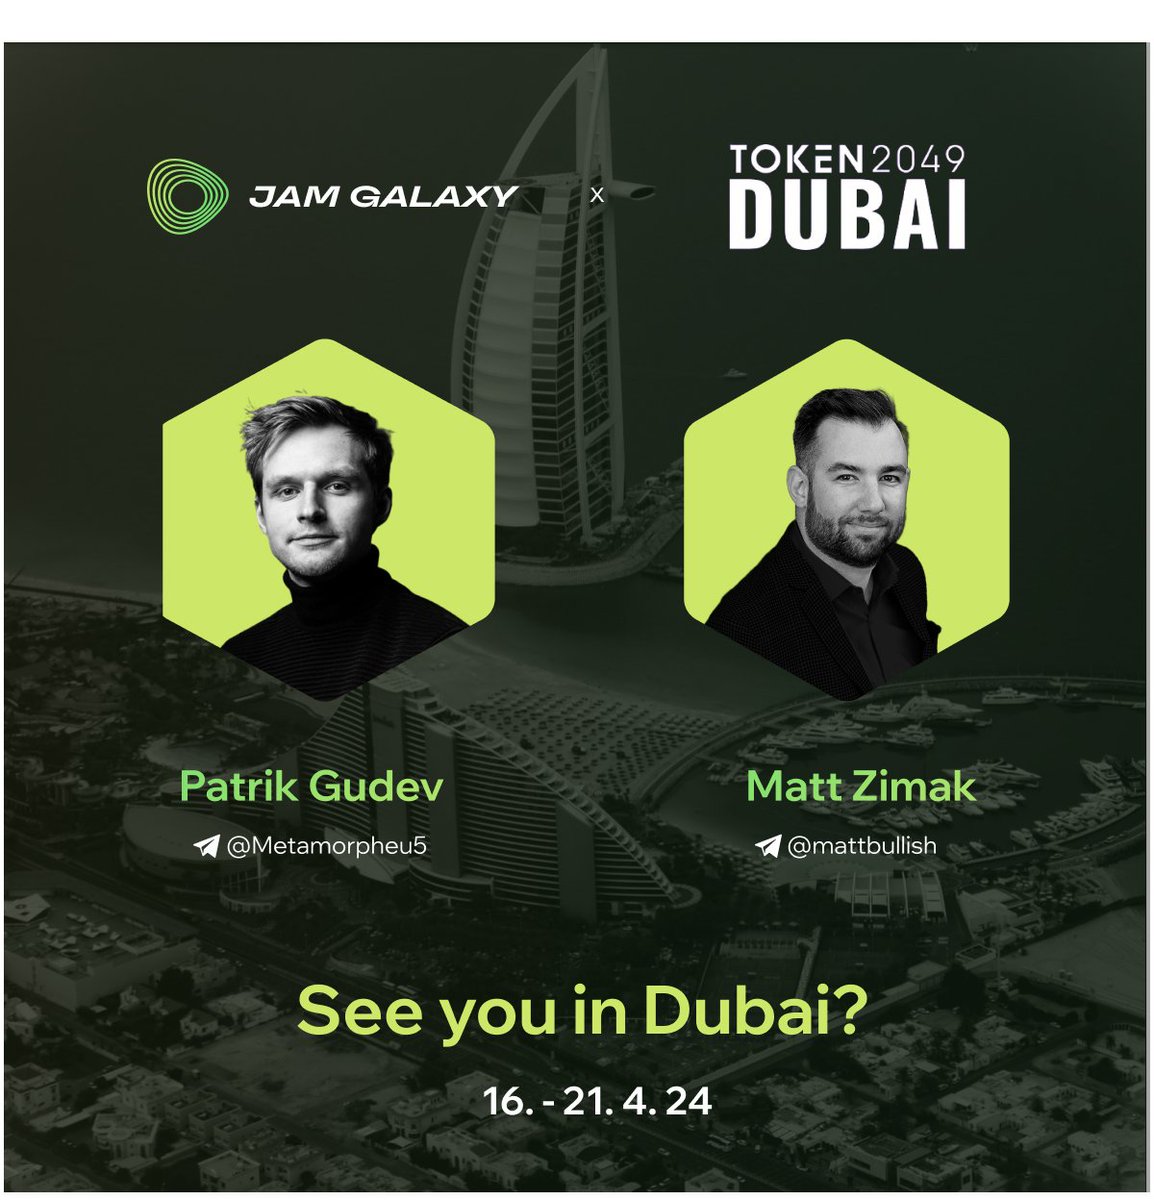 🌍 Heading to #Token2049 in Dubai? So are we! Meet us there to explore the latest developements in crypto. Connect with our co-founders @mattbullish & @GudevPatrik for an insightful chat!